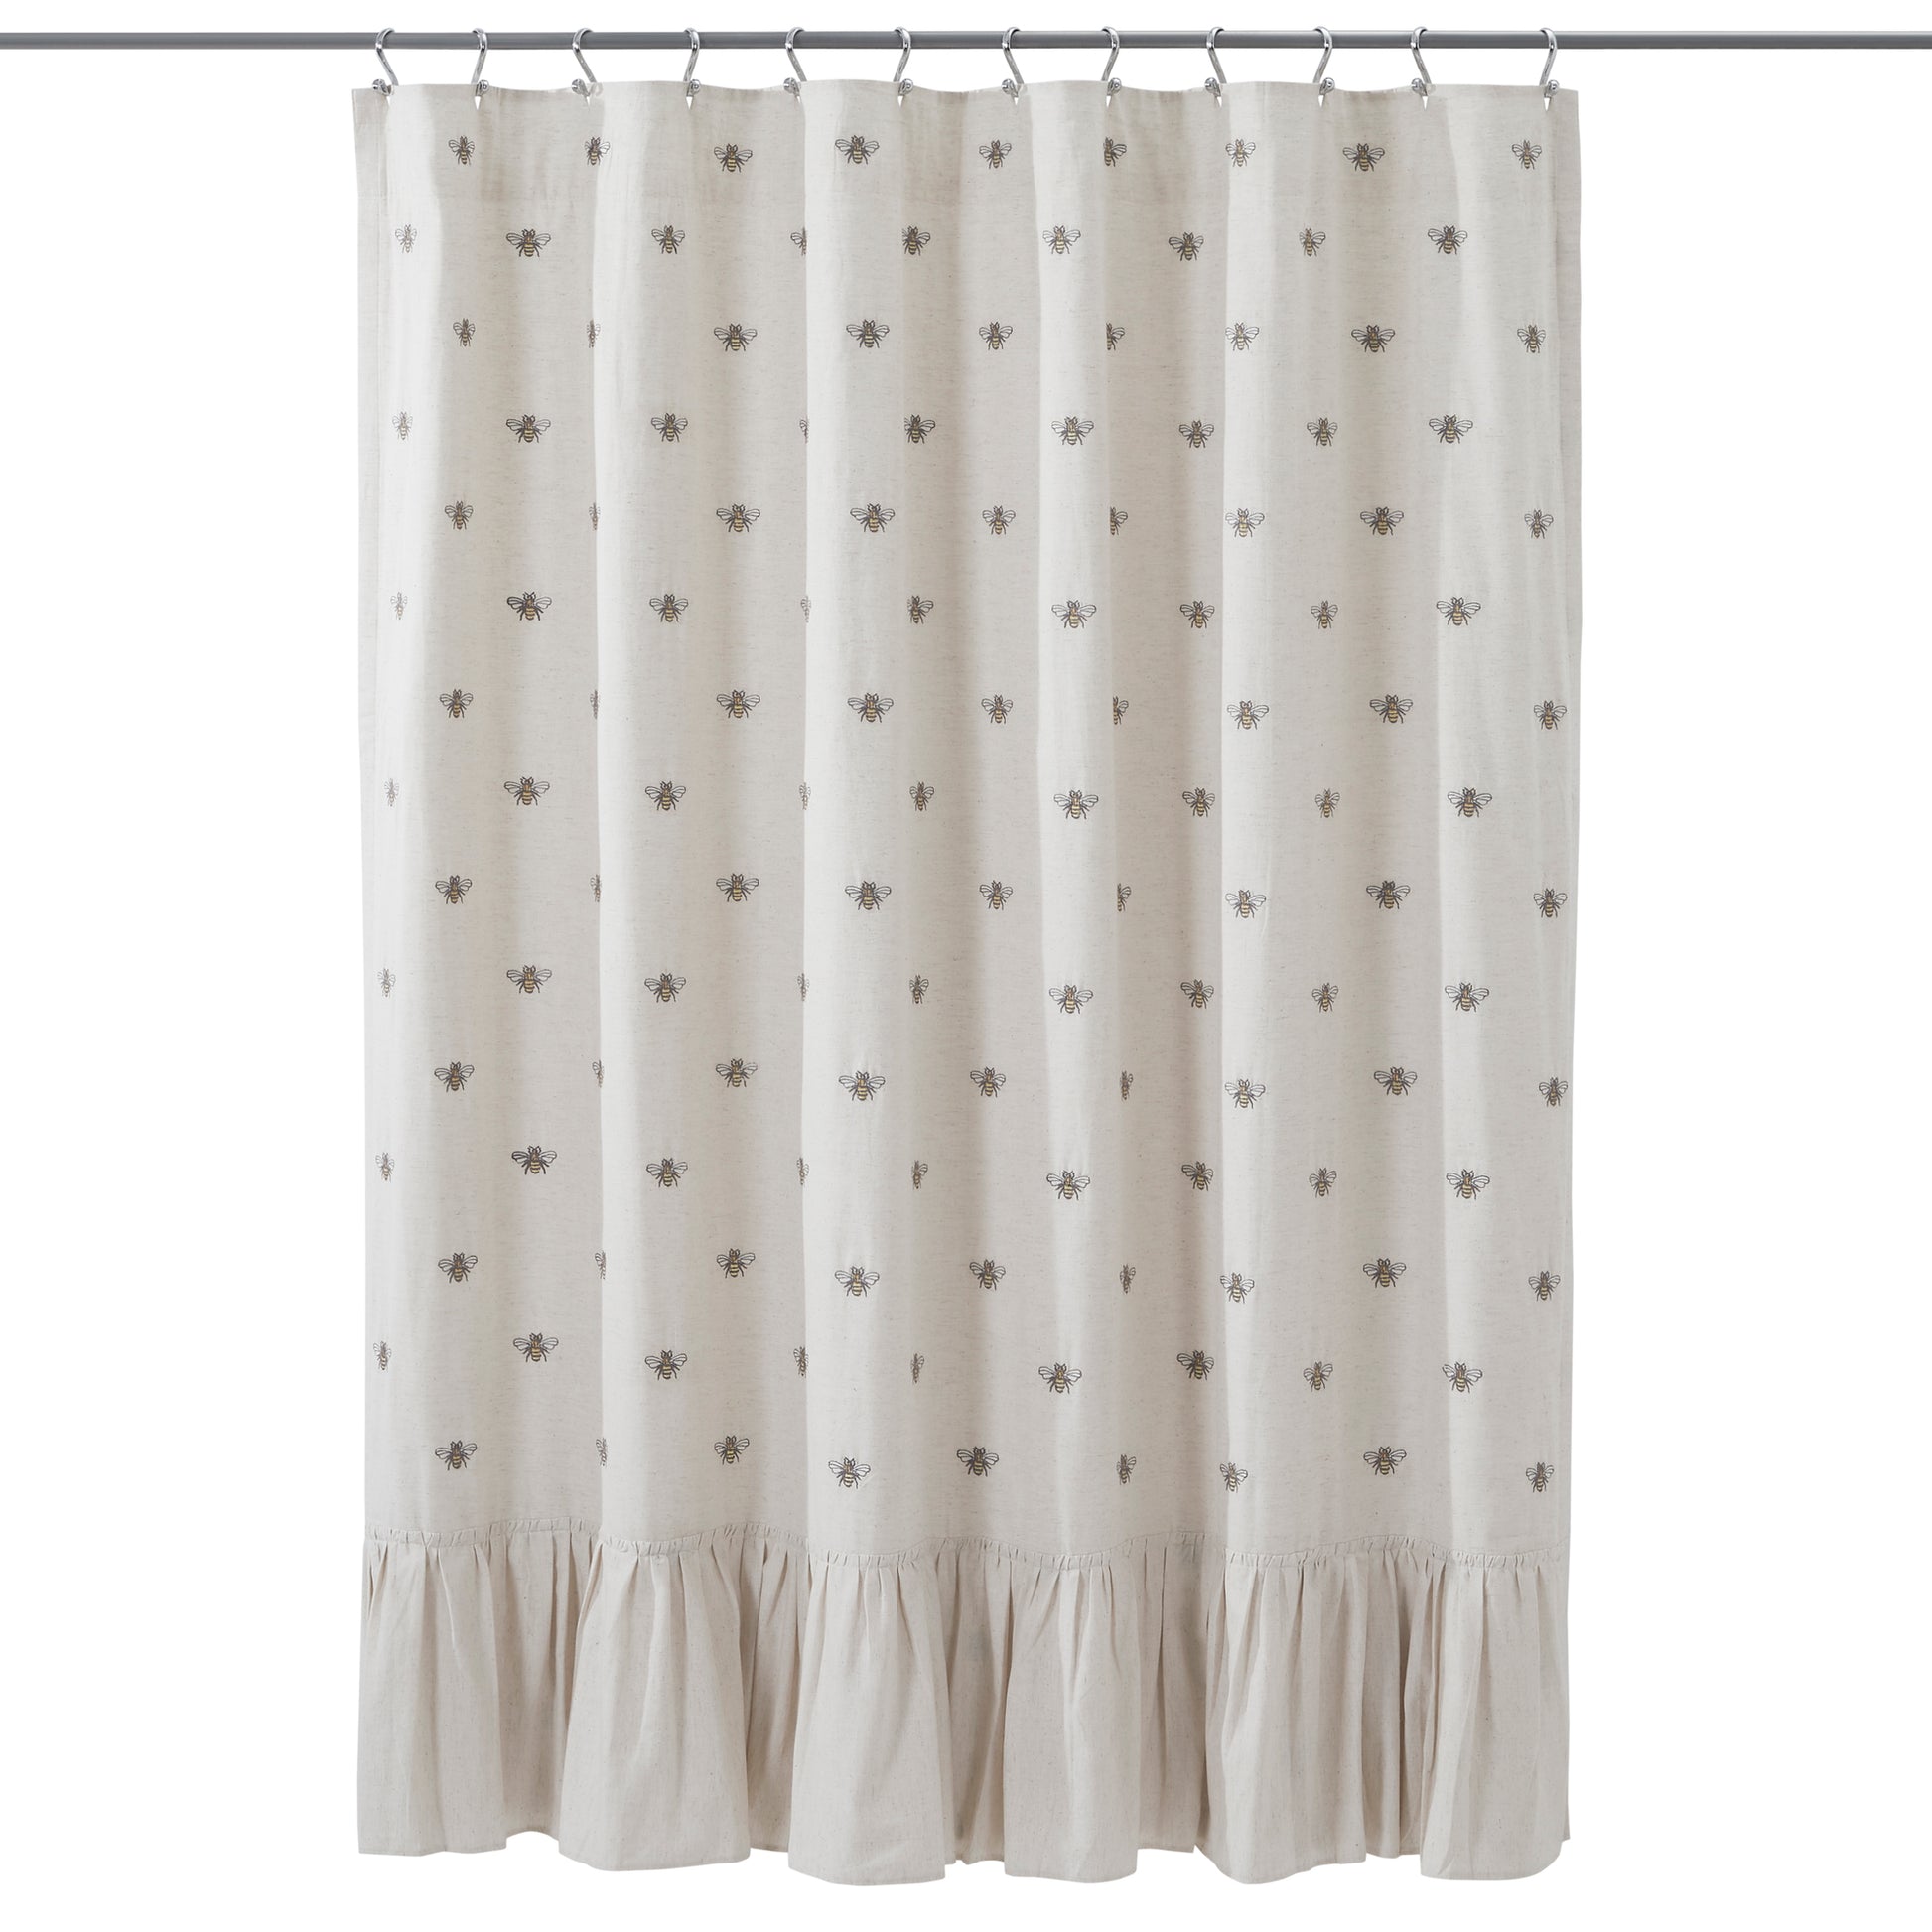 81266-Embroidered-Bee-Shower-Curtain-72x72-image-5